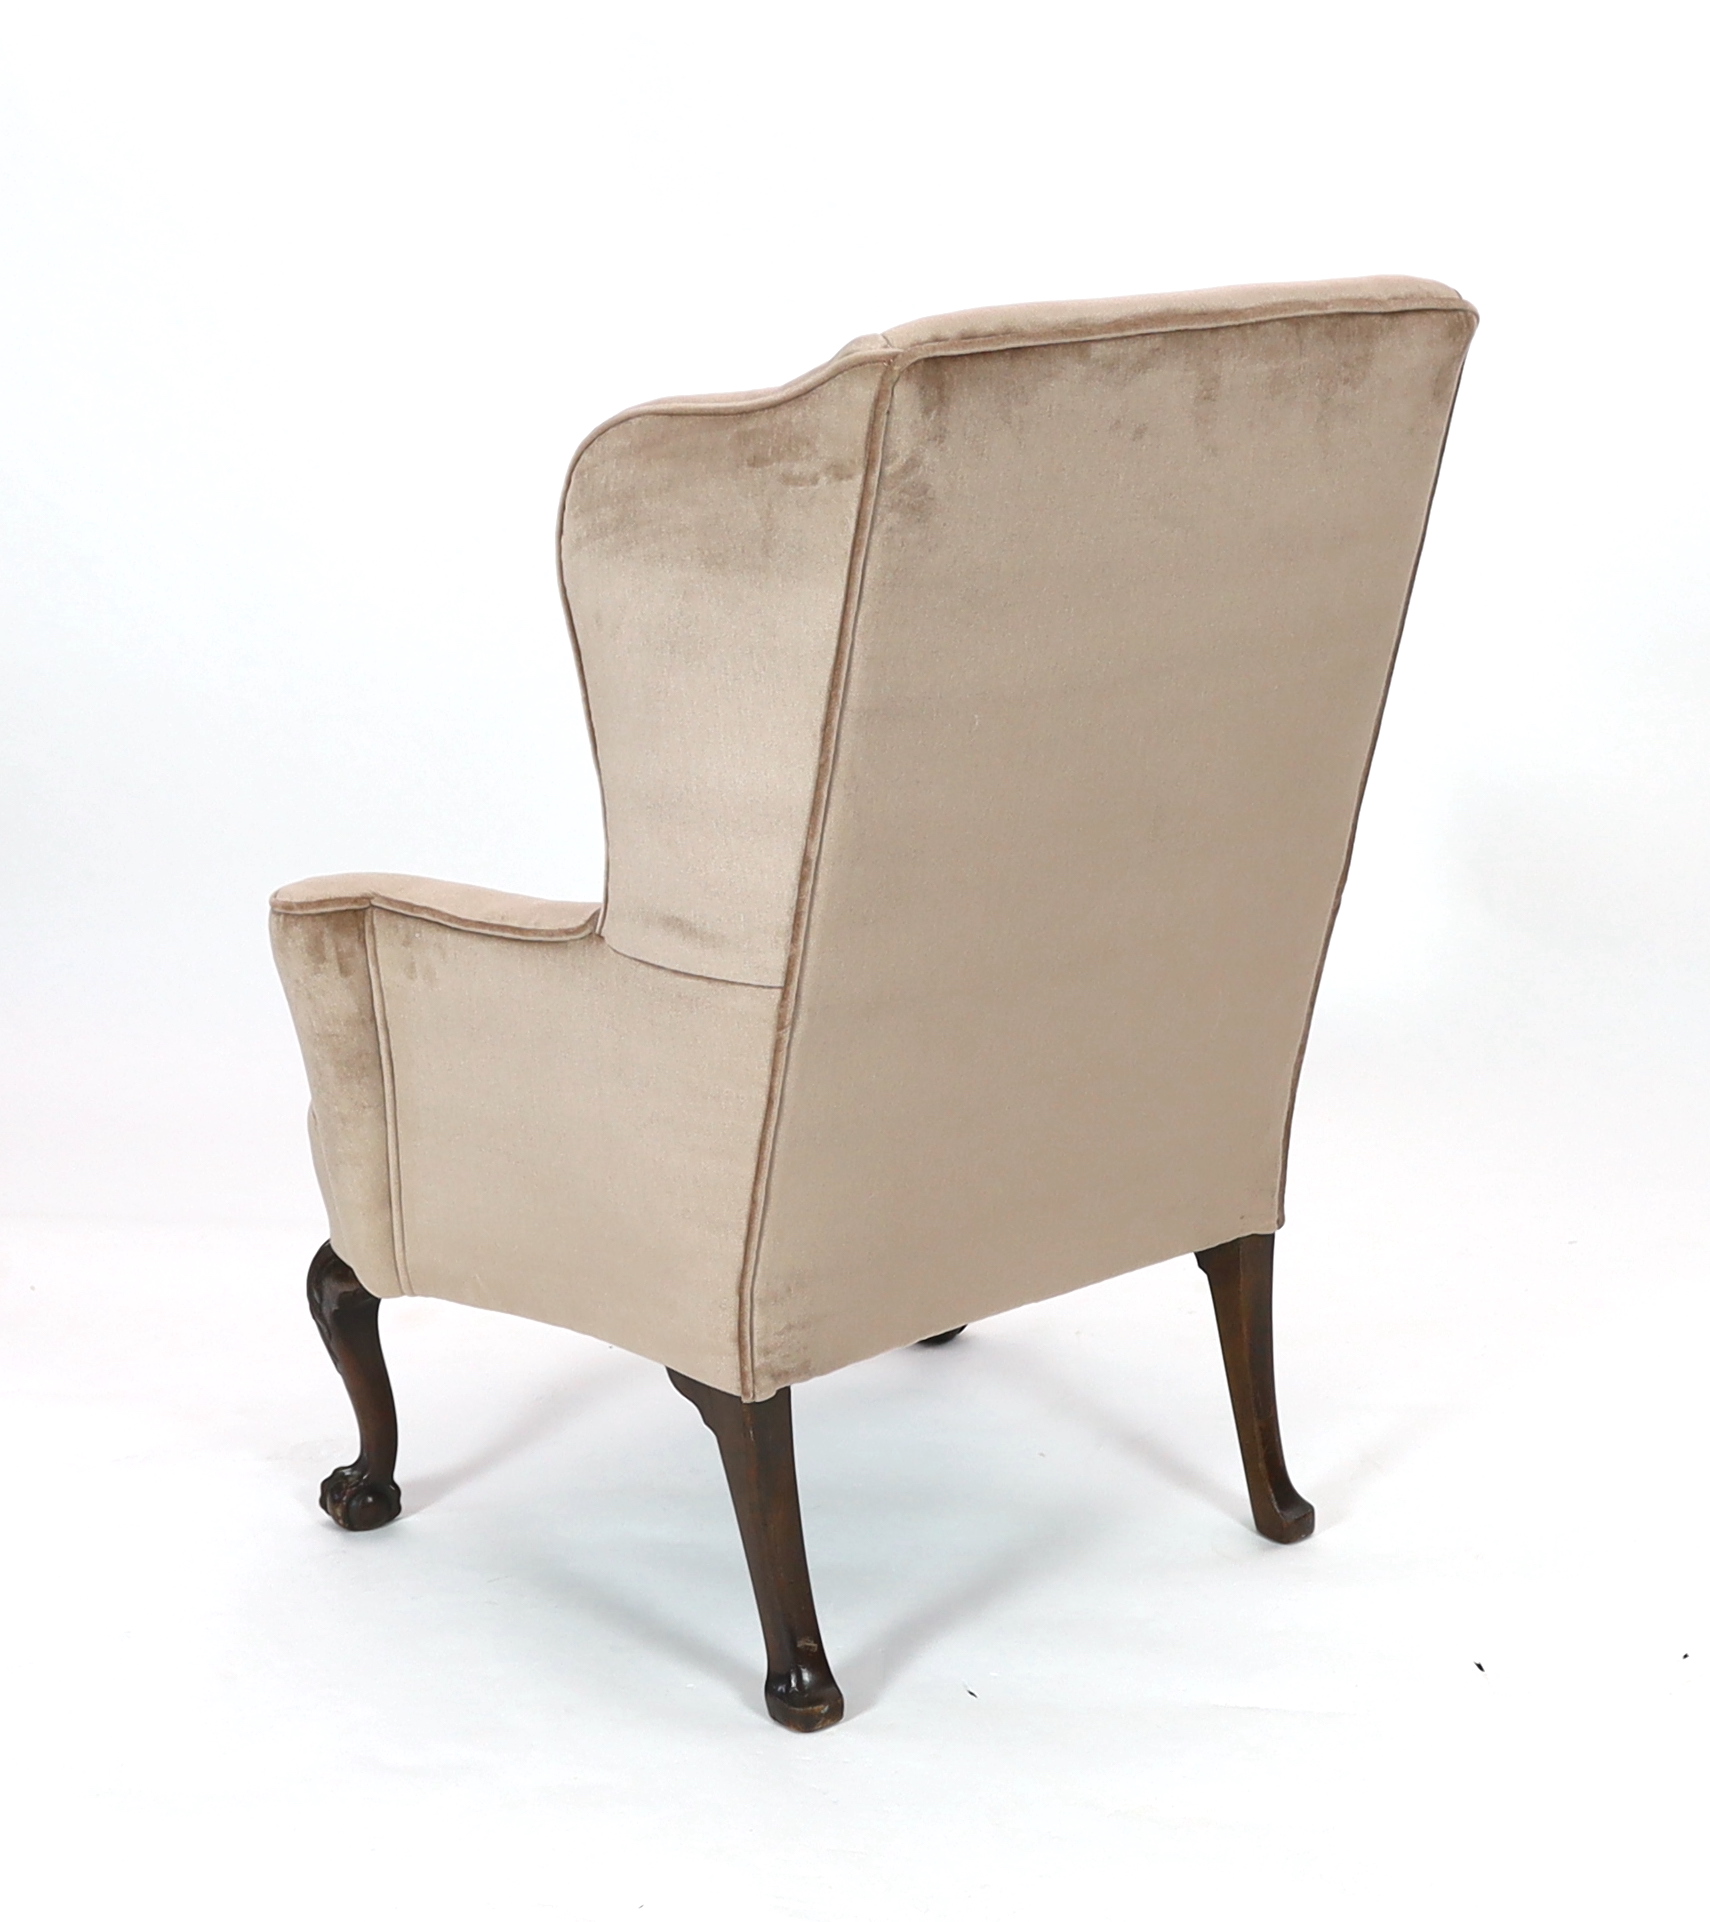 A George II style mahogany wing armchair